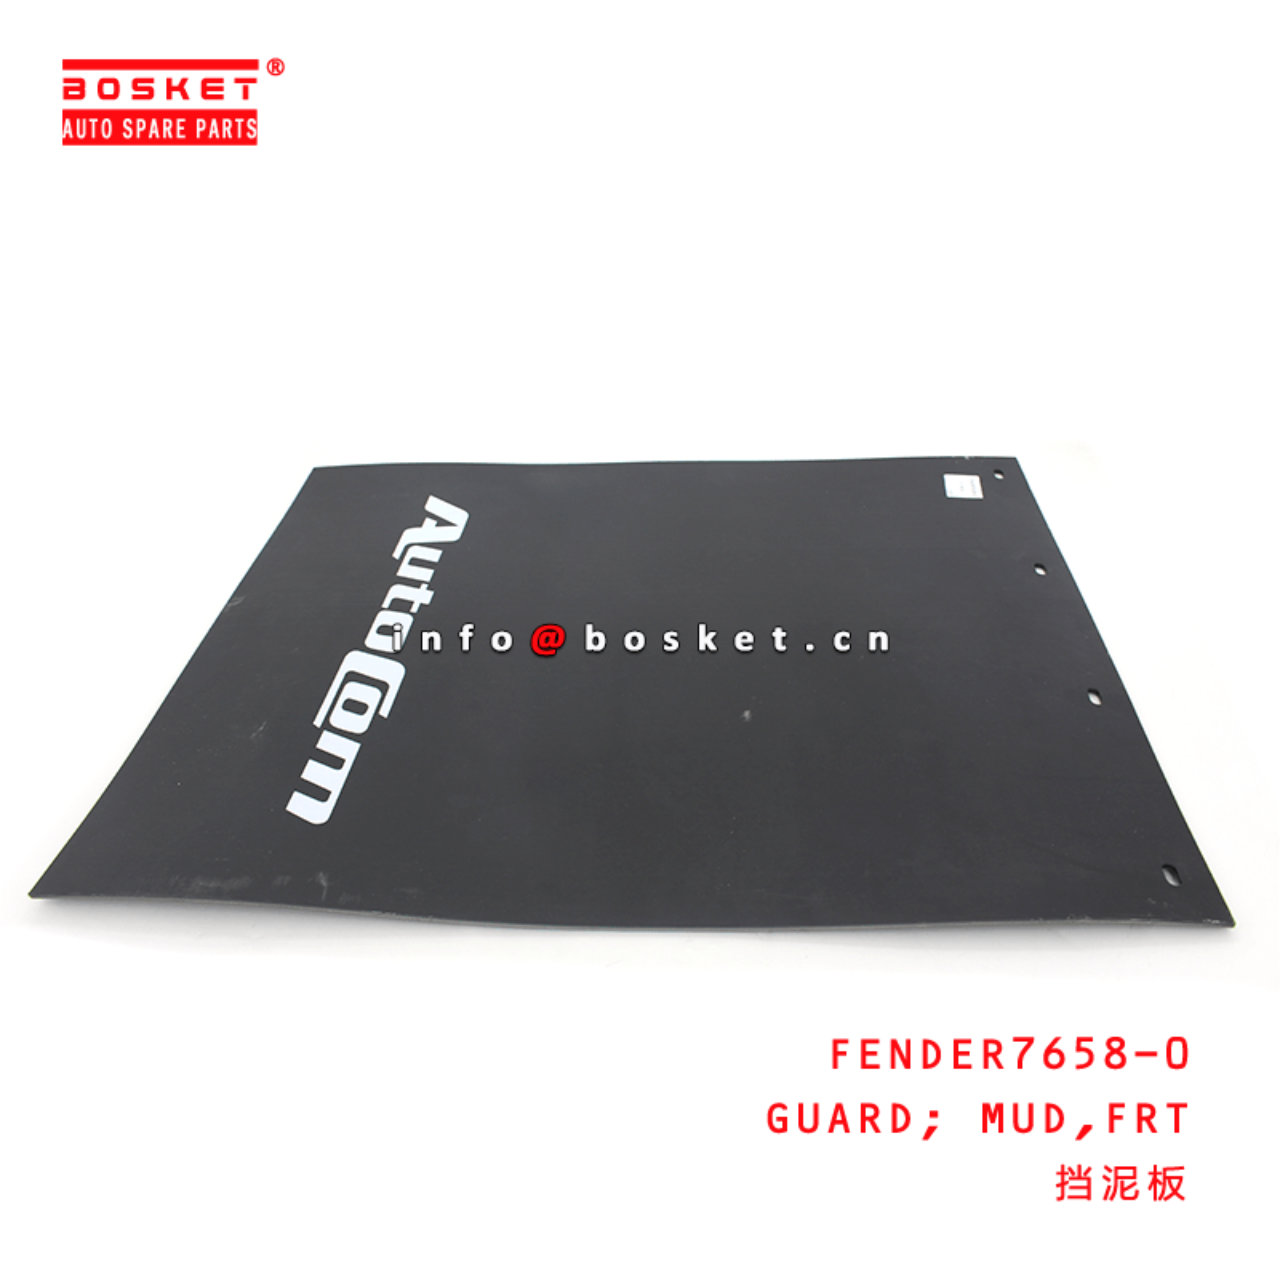  FENDER7658-0 Front Mud Guard Suitable for ISUZU 